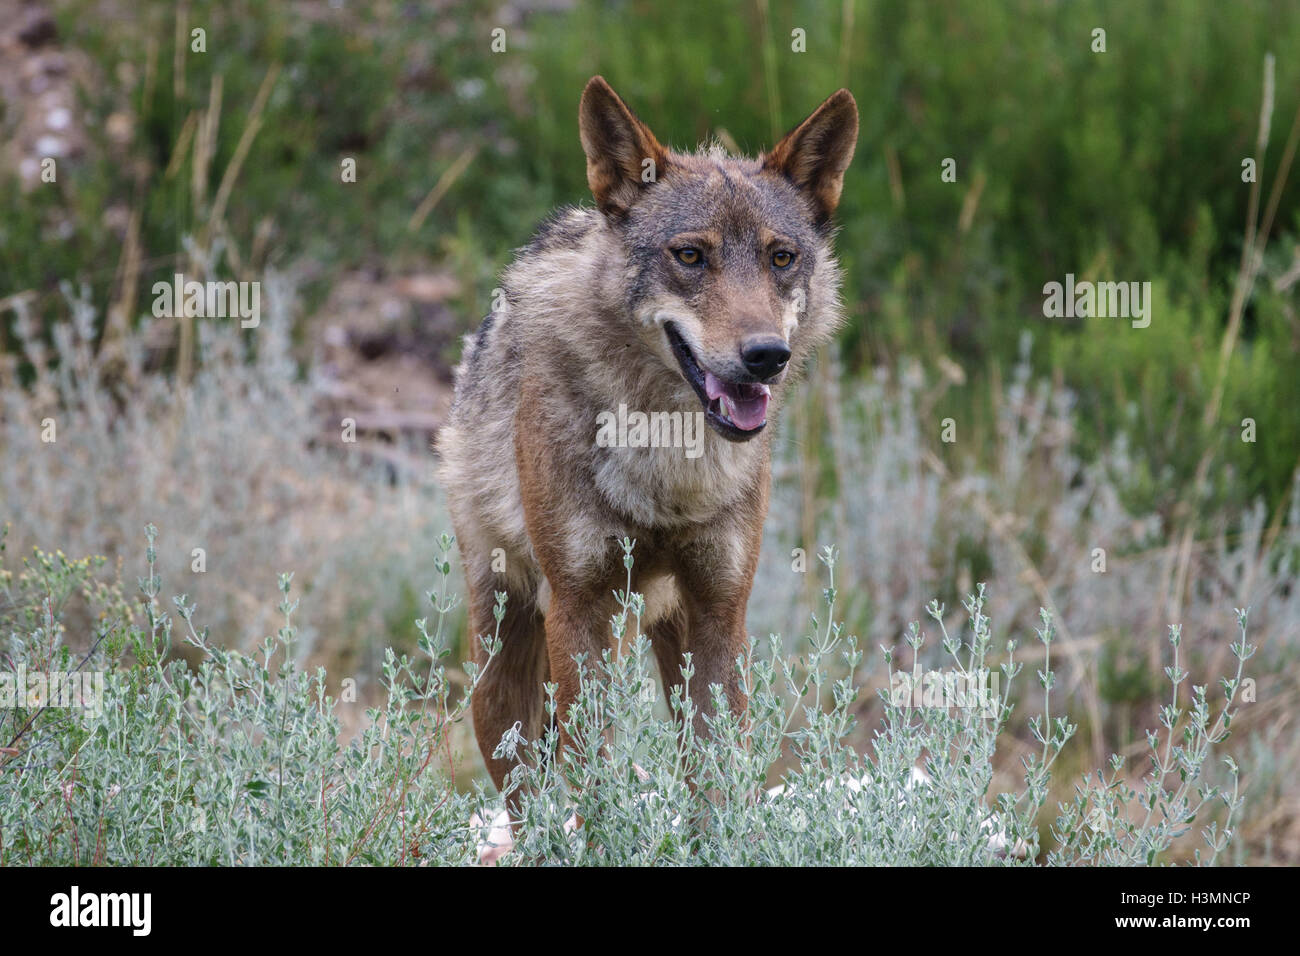 Canis Lupus Signatus watching, front view Stock Photo